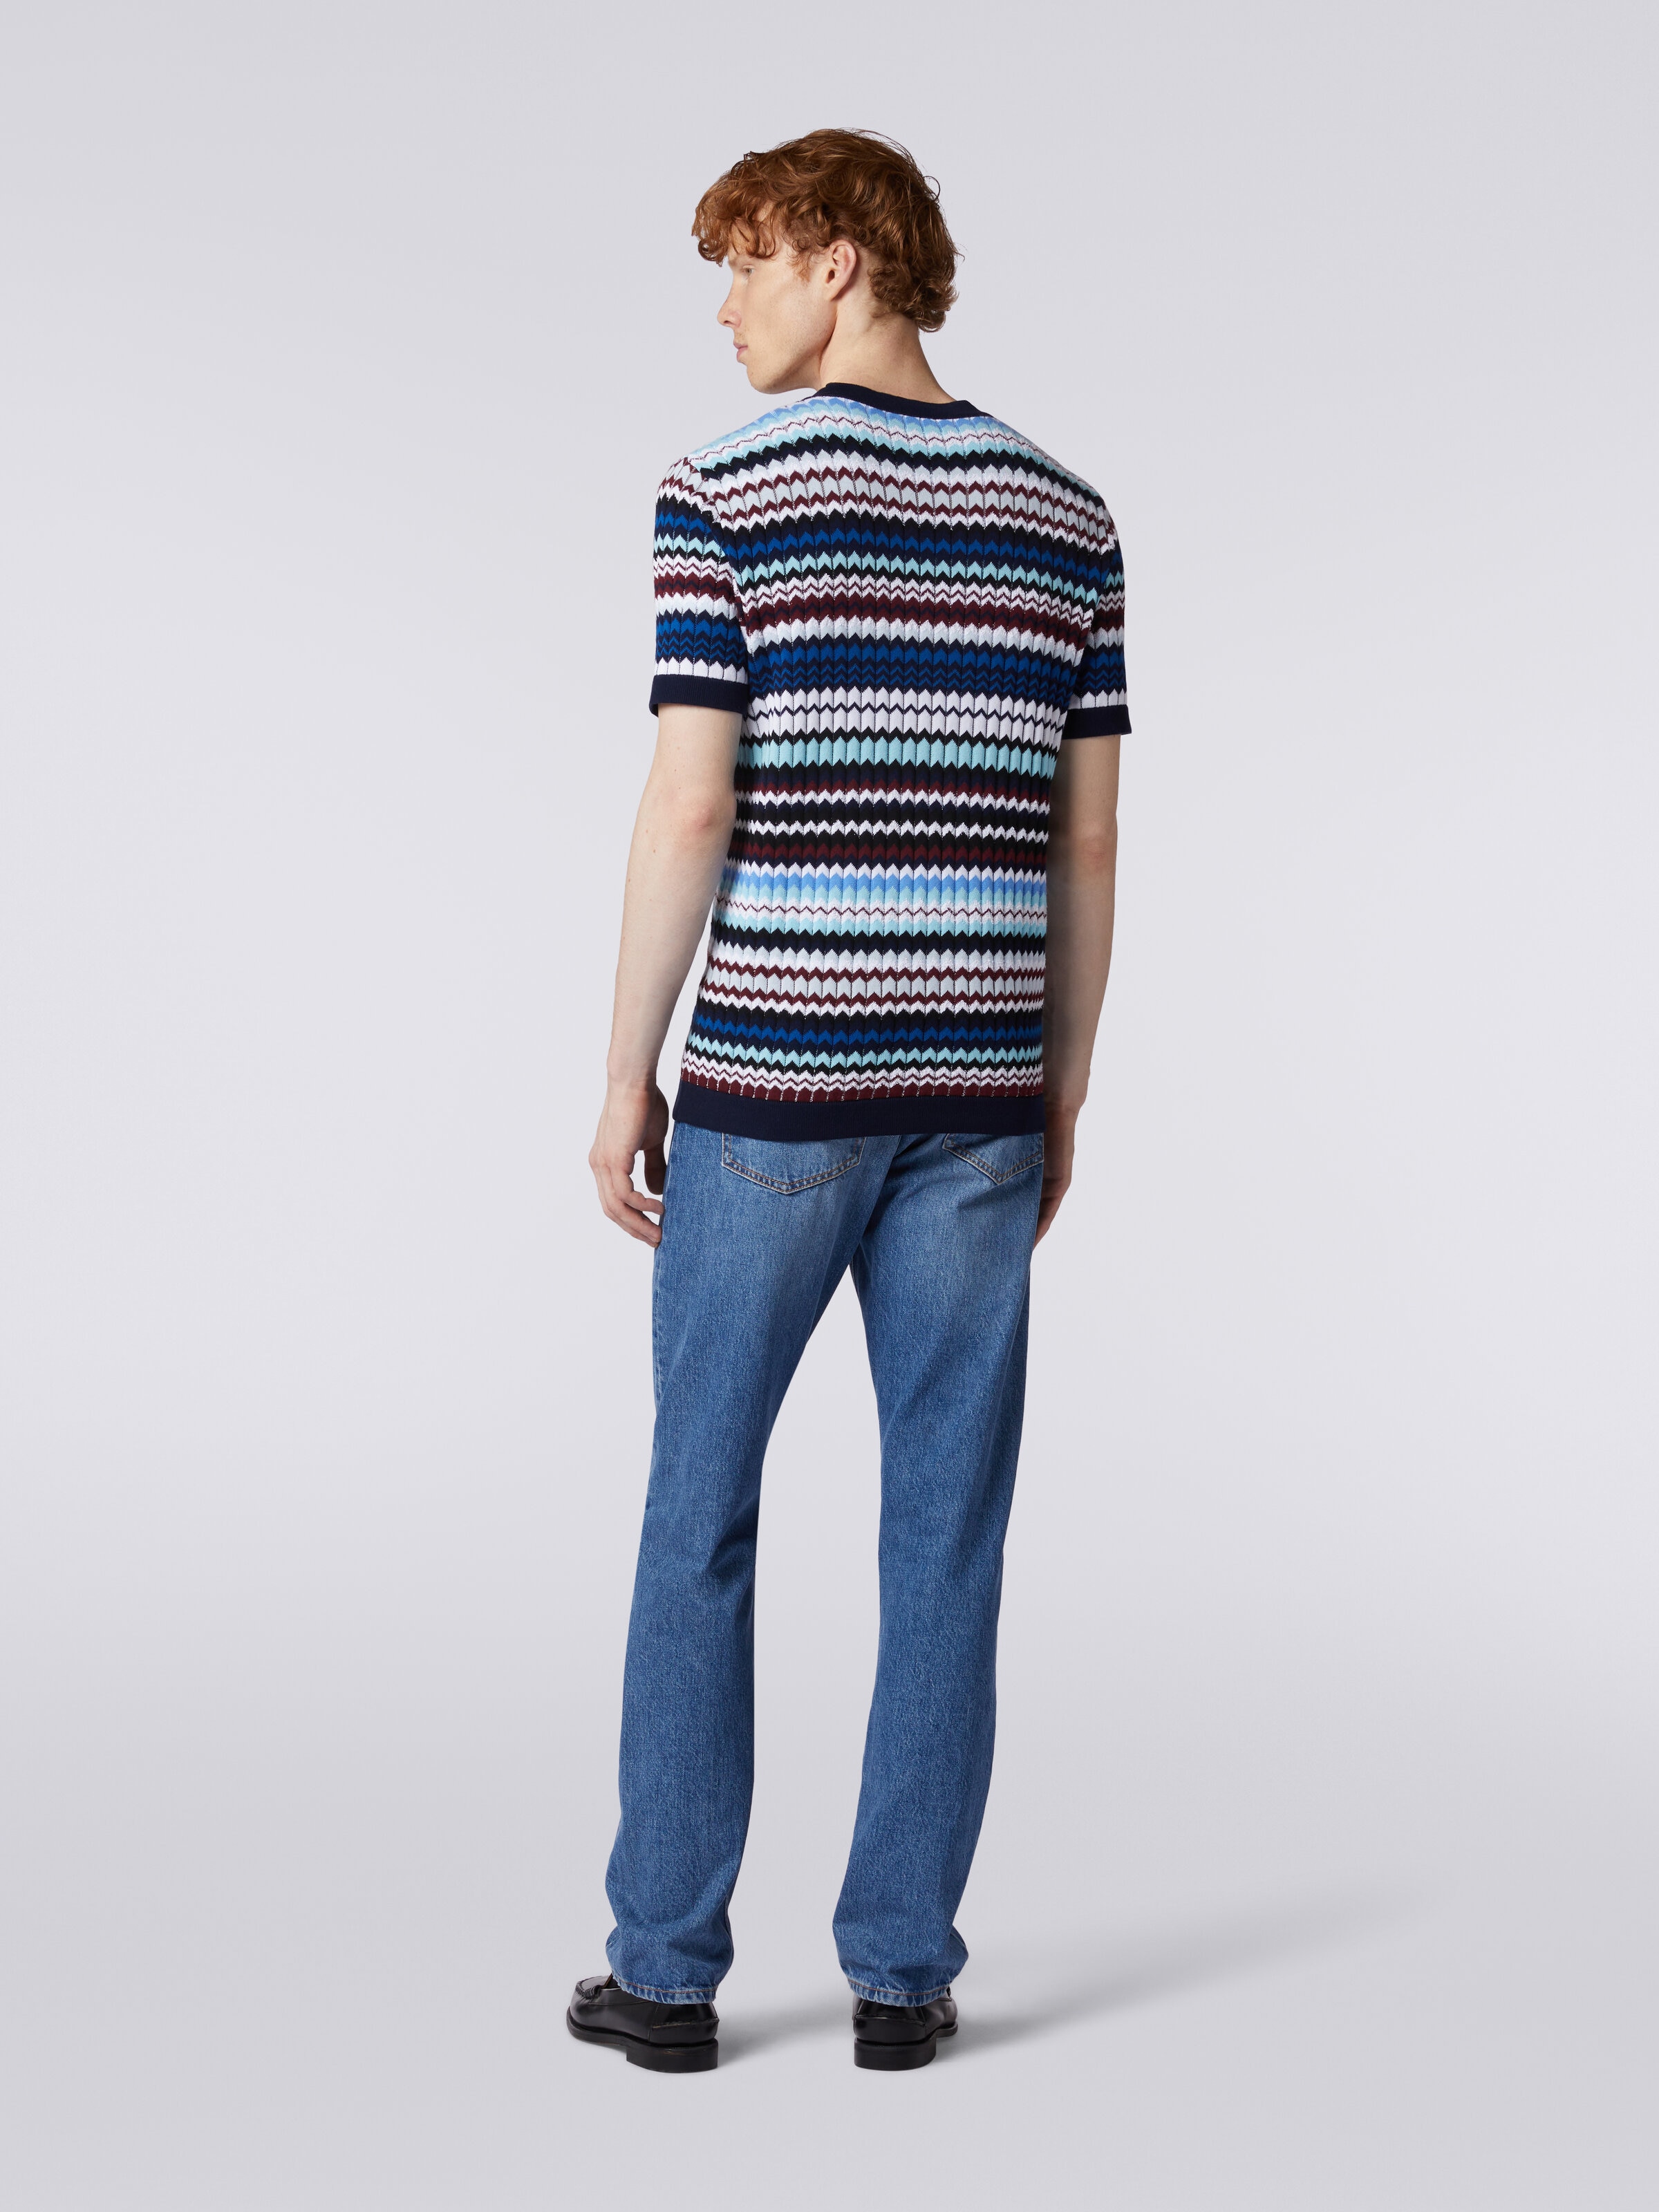 T-shirt in ribbed zigzag cotton knit, Multicoloured  - 3